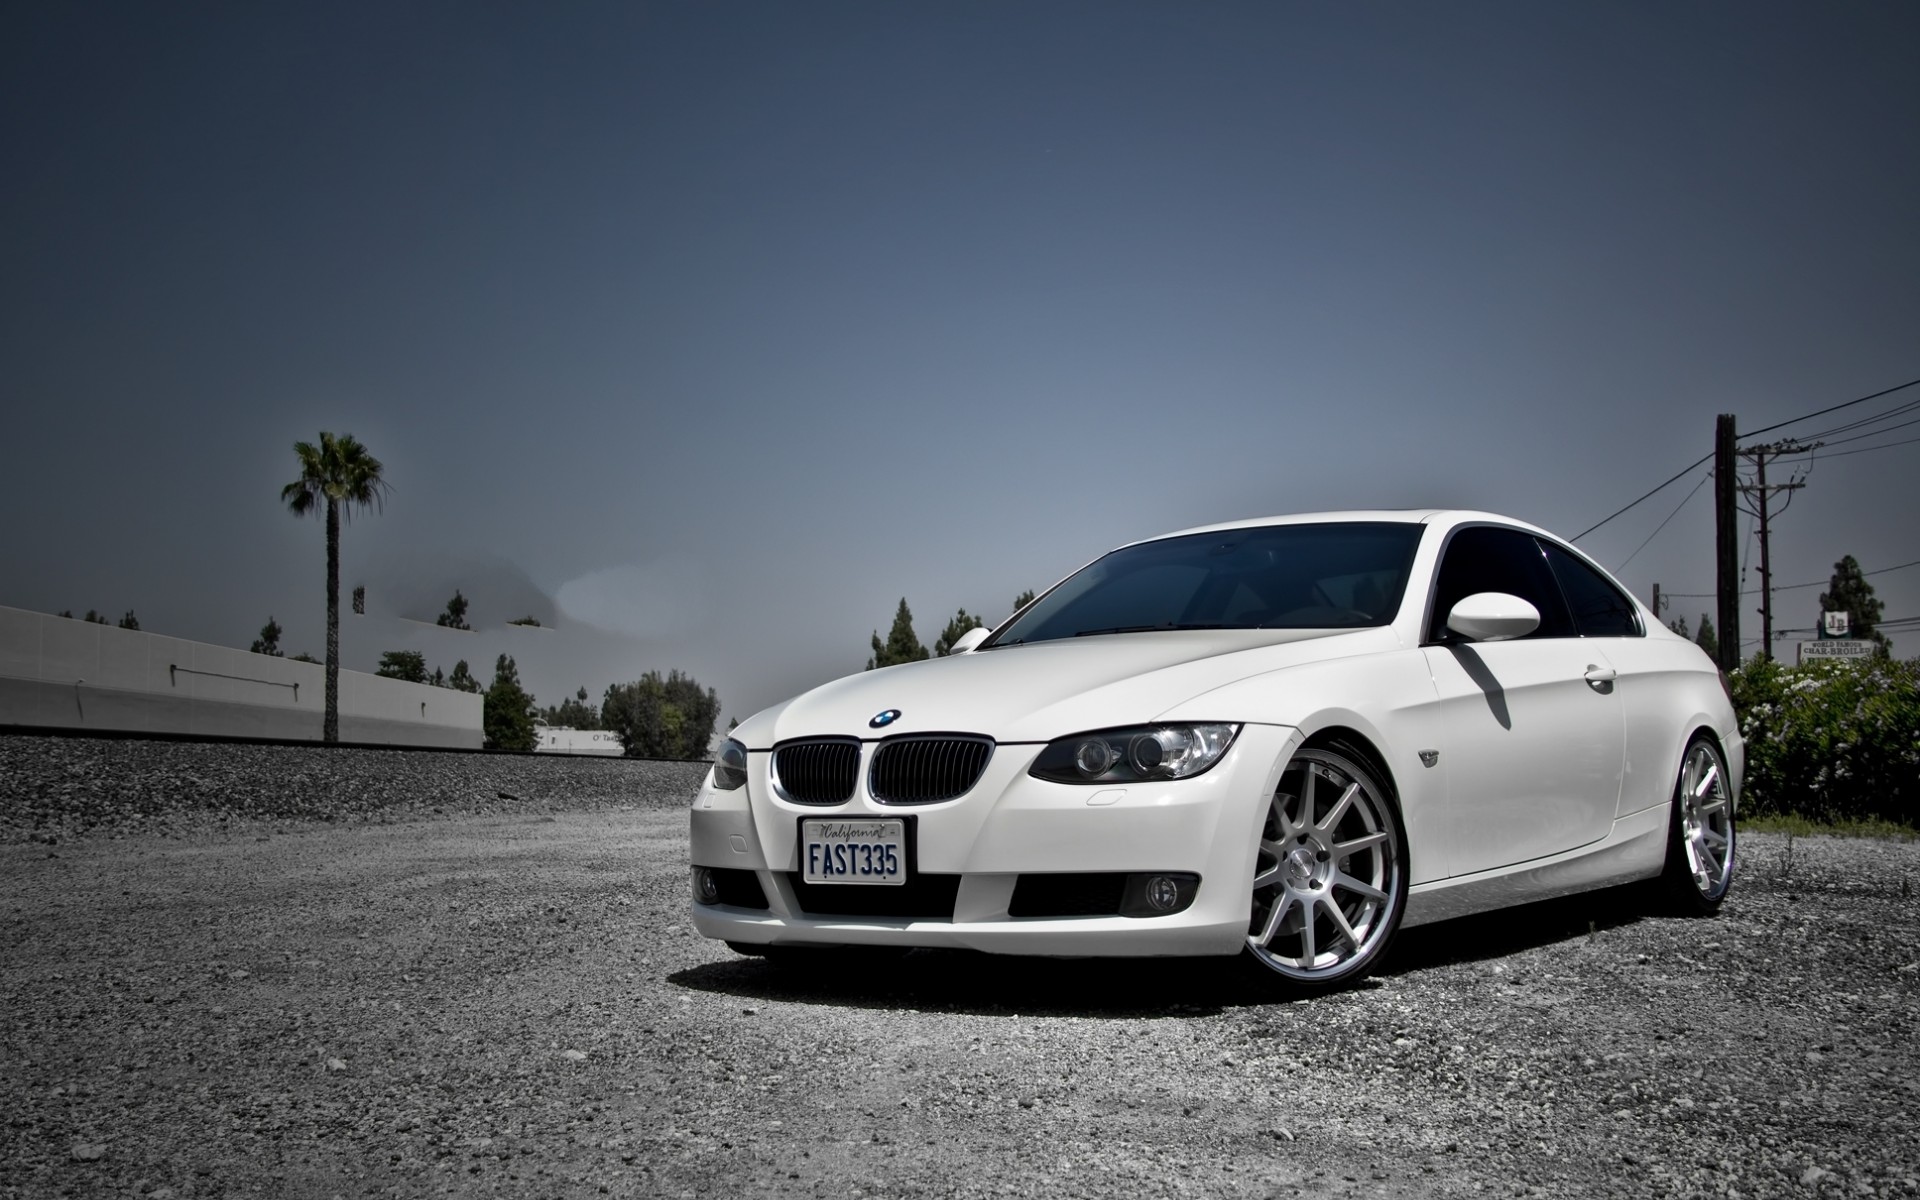 Free Download Bmw 335i Coupe White Image 35 1920x1200 For Your Desktop Mobile Tablet Explore 97 Bmw 3 Wallpapers Bmw 3 Wallpapers Bmw 3 Series Wallpaper Bmw 3 Series Wallpapers